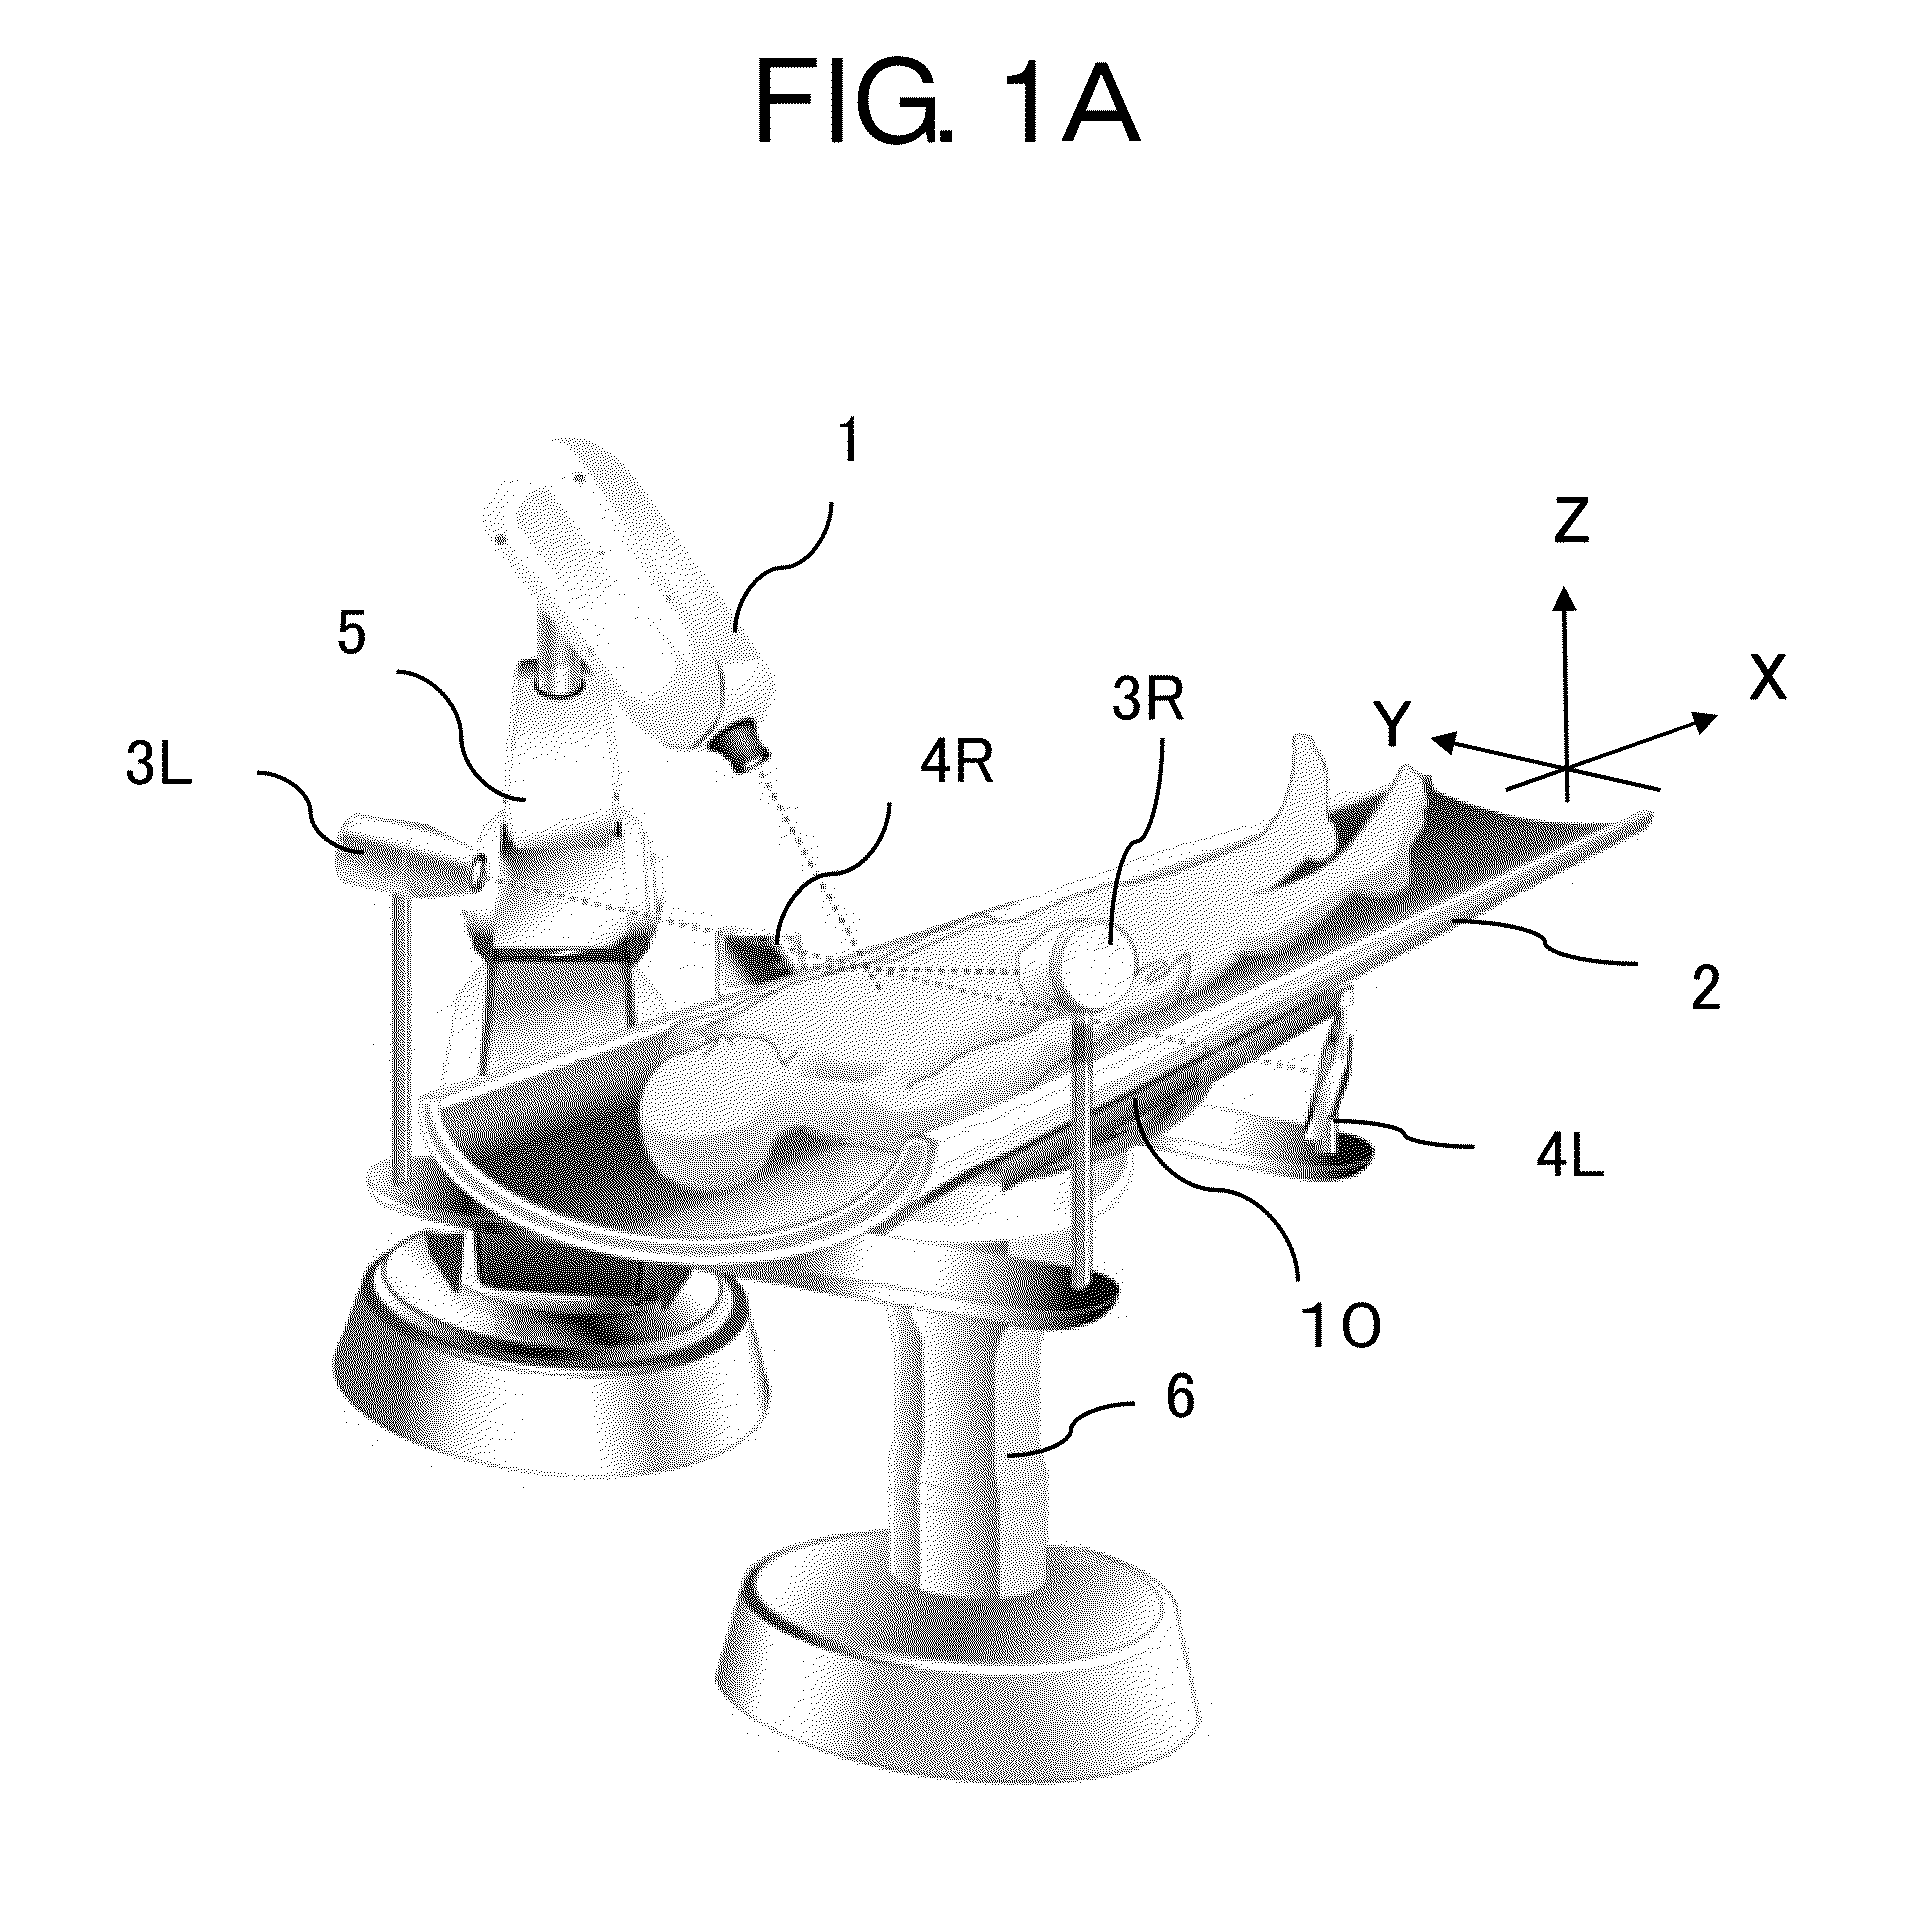 Apparatus and method for x-ray treatment